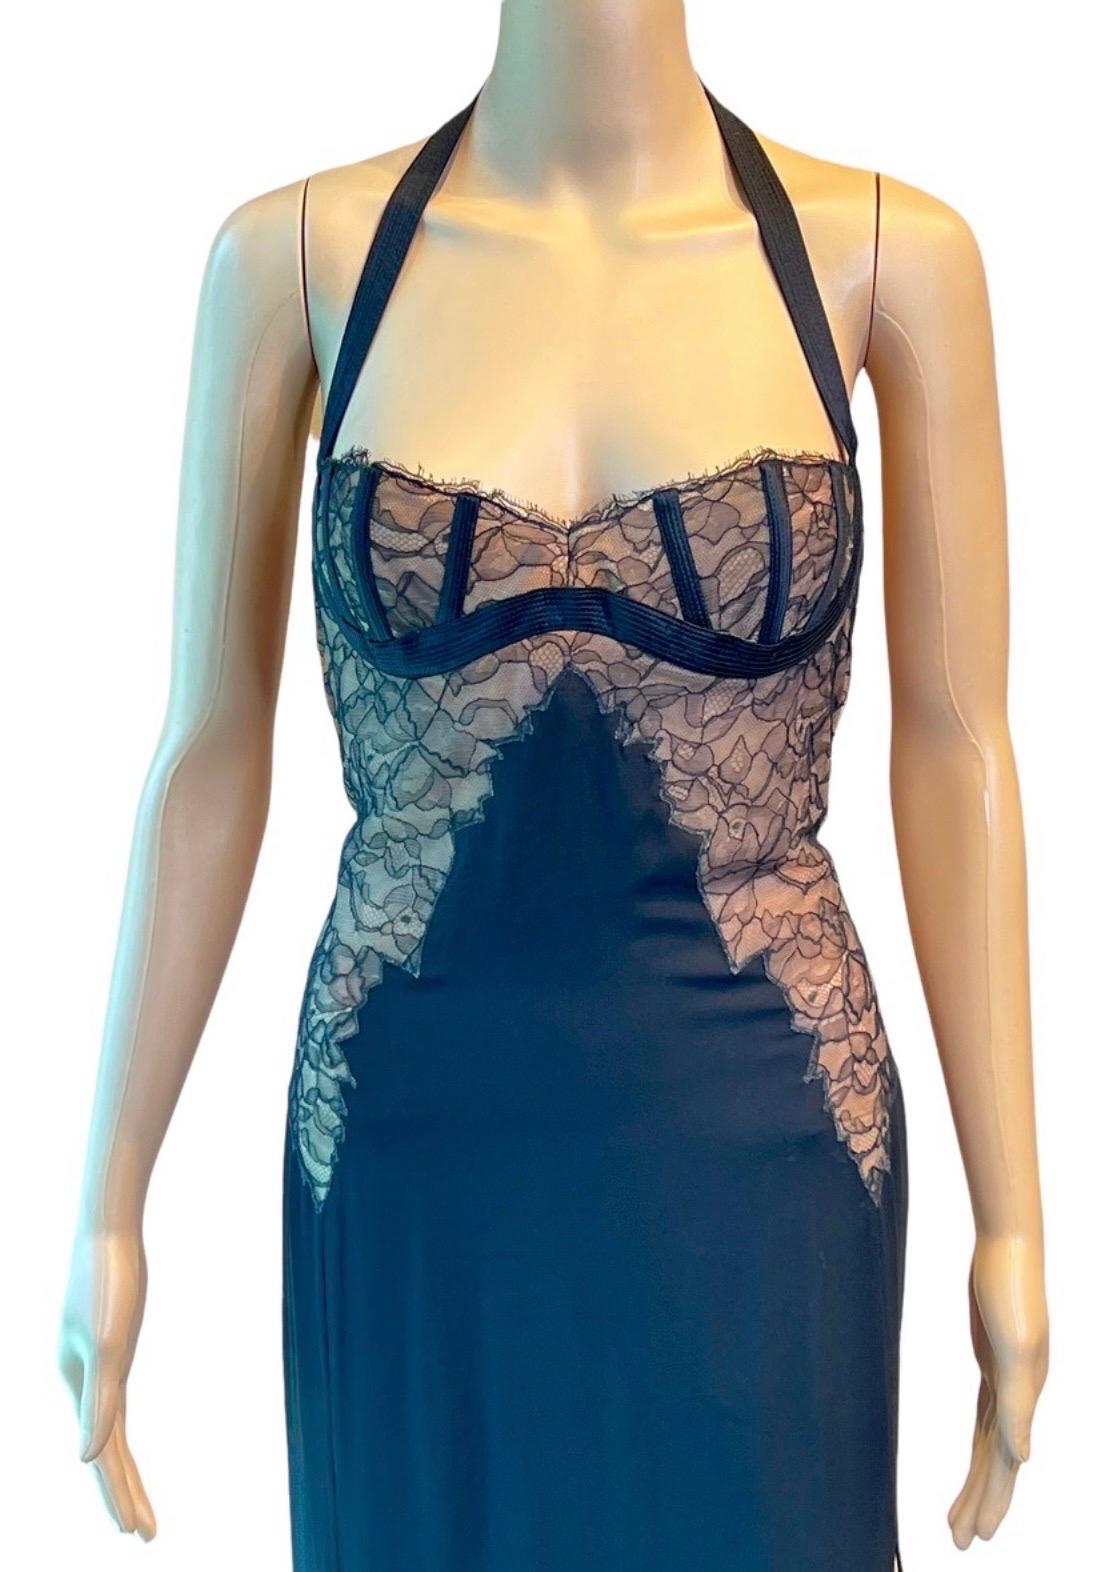 Gianni Versace S/S 1992 Bustier Lace Bra Sheer Panels Slit Evening Dress Gown For Sale 3